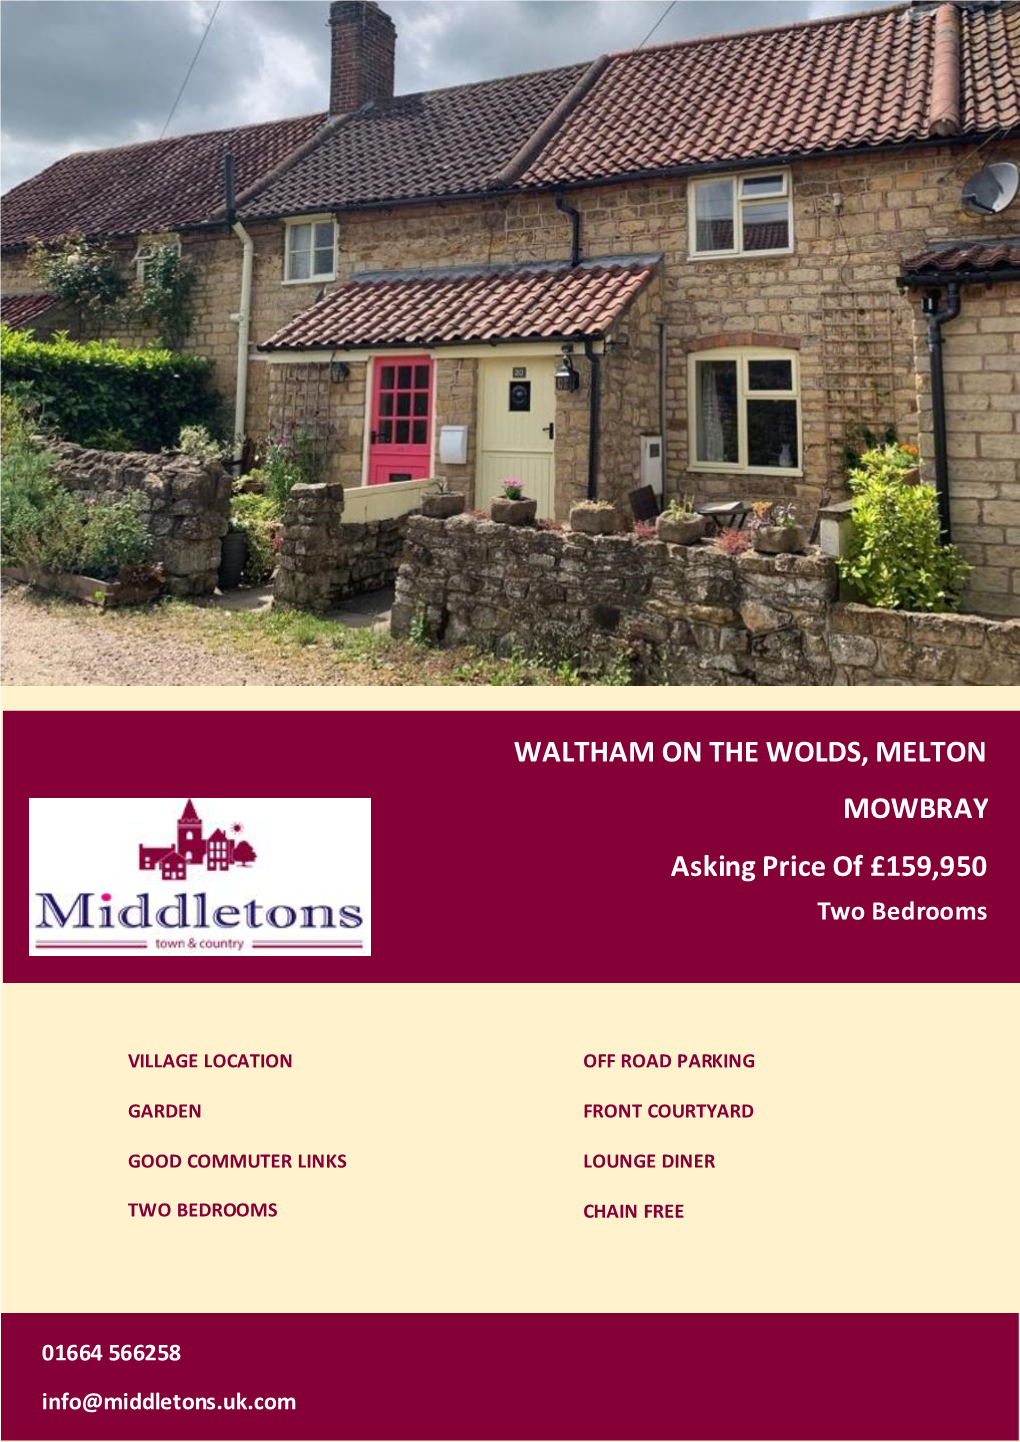 WALTHAM on the WOLDS, MELTON MOWBRAY Asking Price of £159,950 Two Bedrooms Freehold